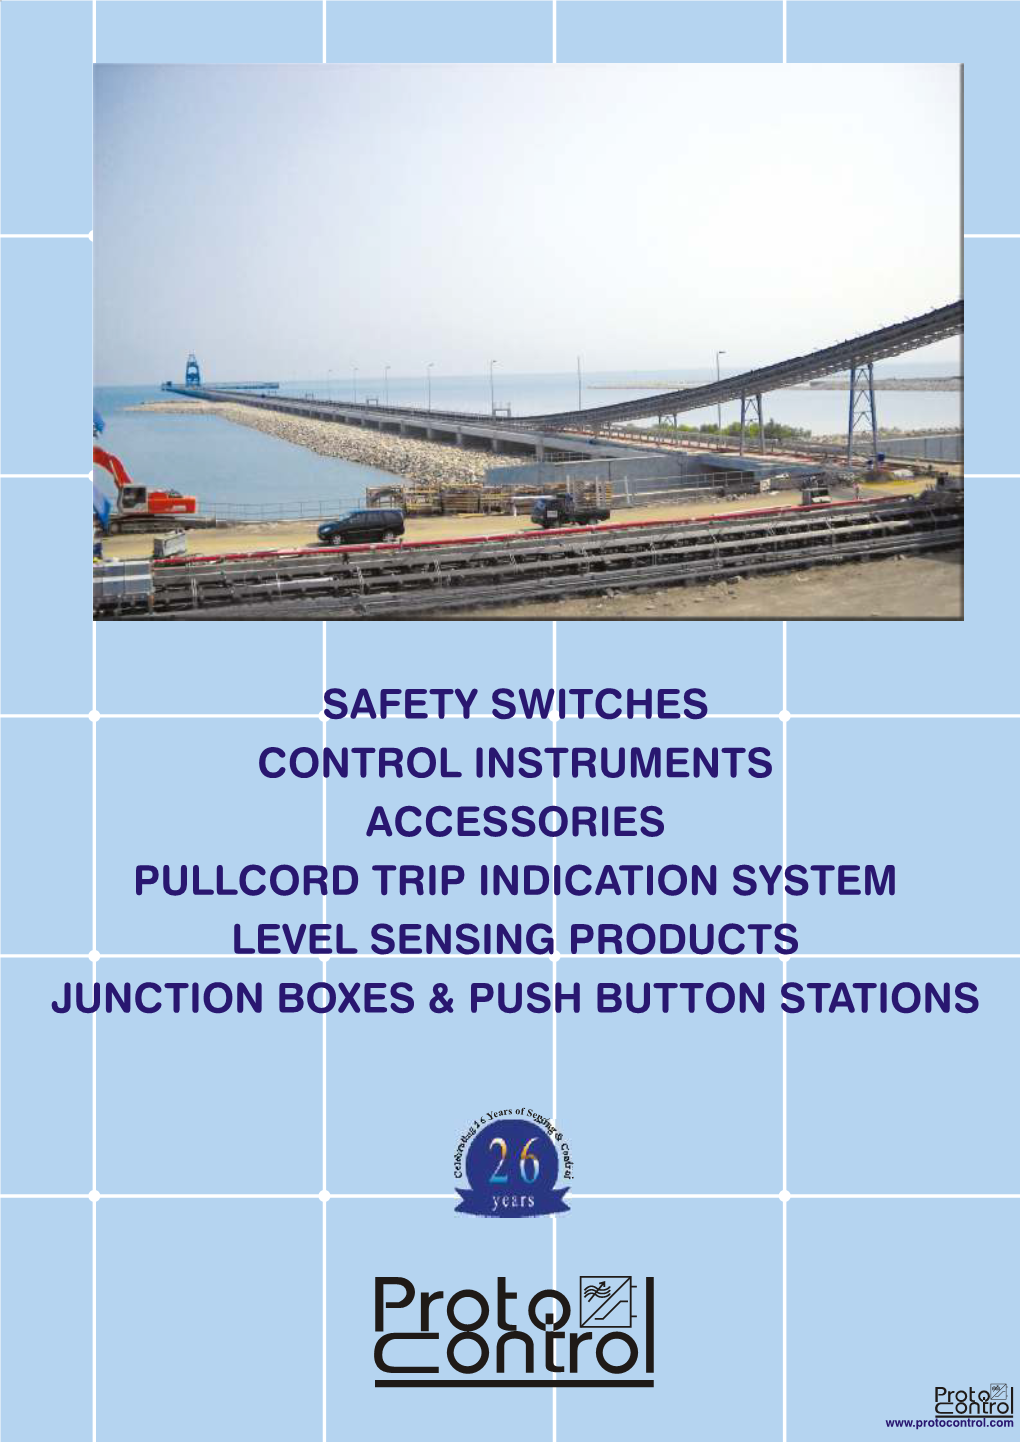 Safety Switches Control Instruments Accessories Pullcord Trip Indication System Level Sensing Products Junction Boxes & Push Button Stations